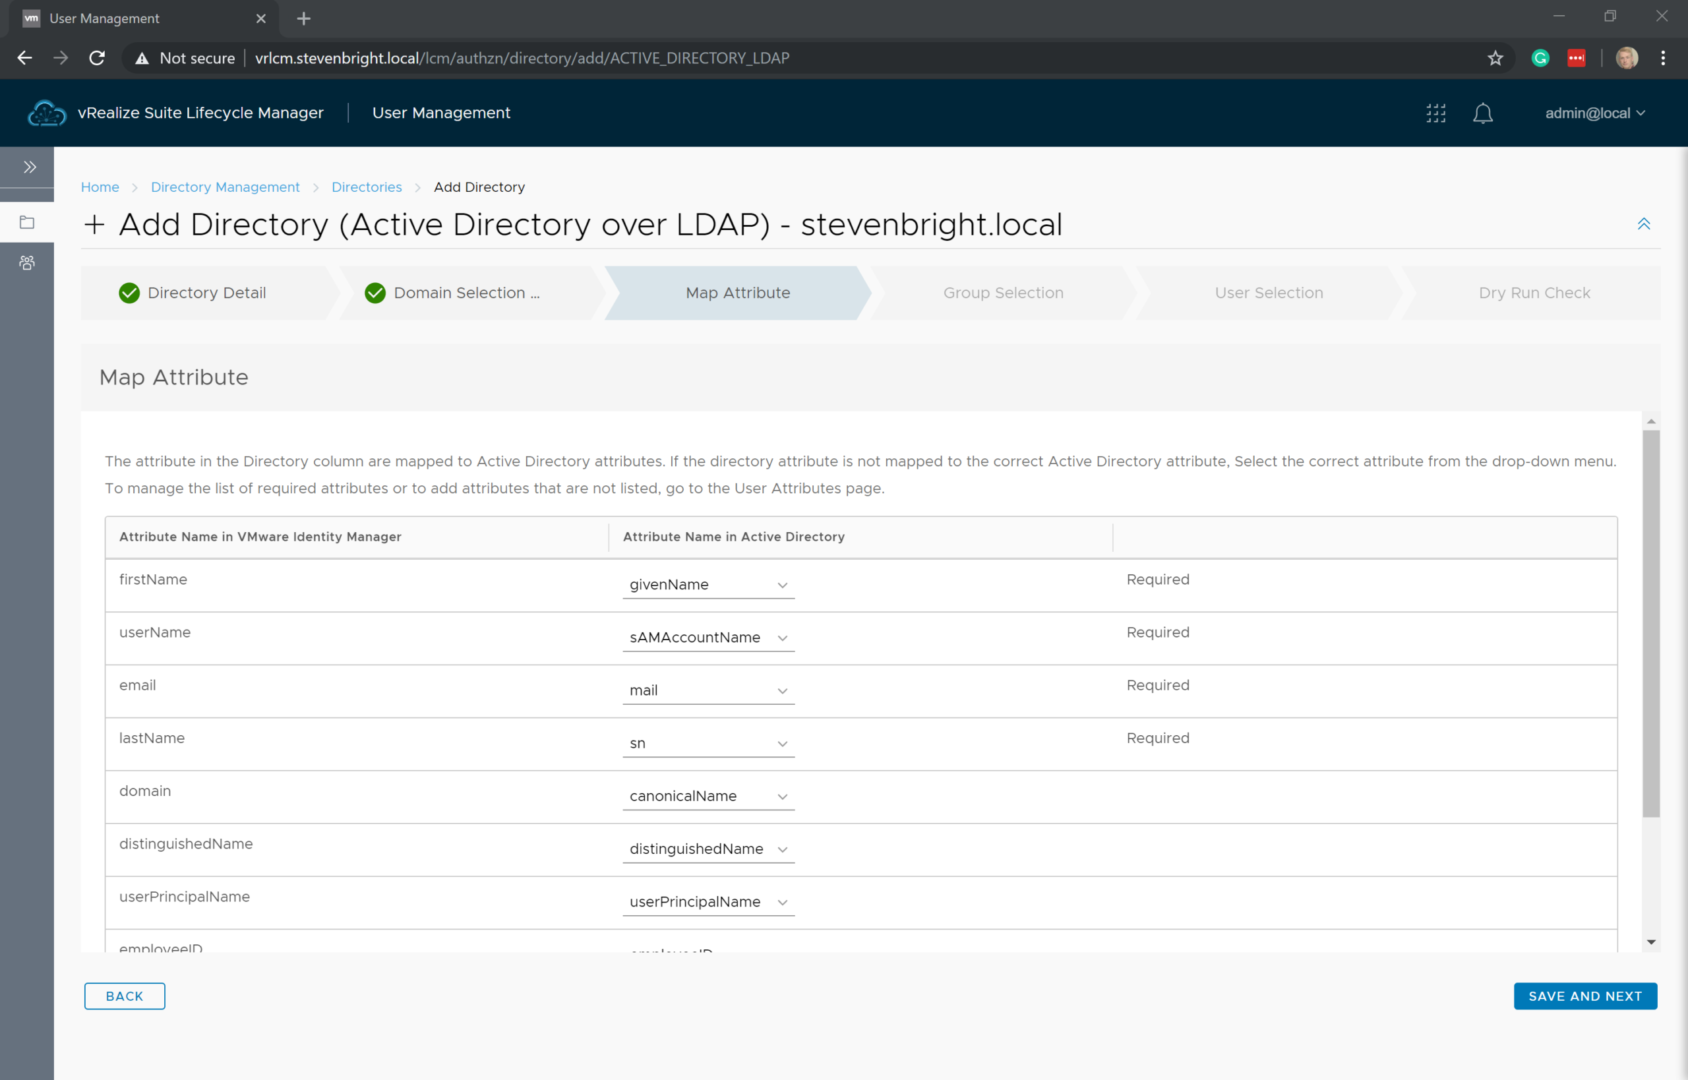 vRealize Suite Lifecycle Manager - User Management - Directory Management - Add Directory Wizard - Map Attribute